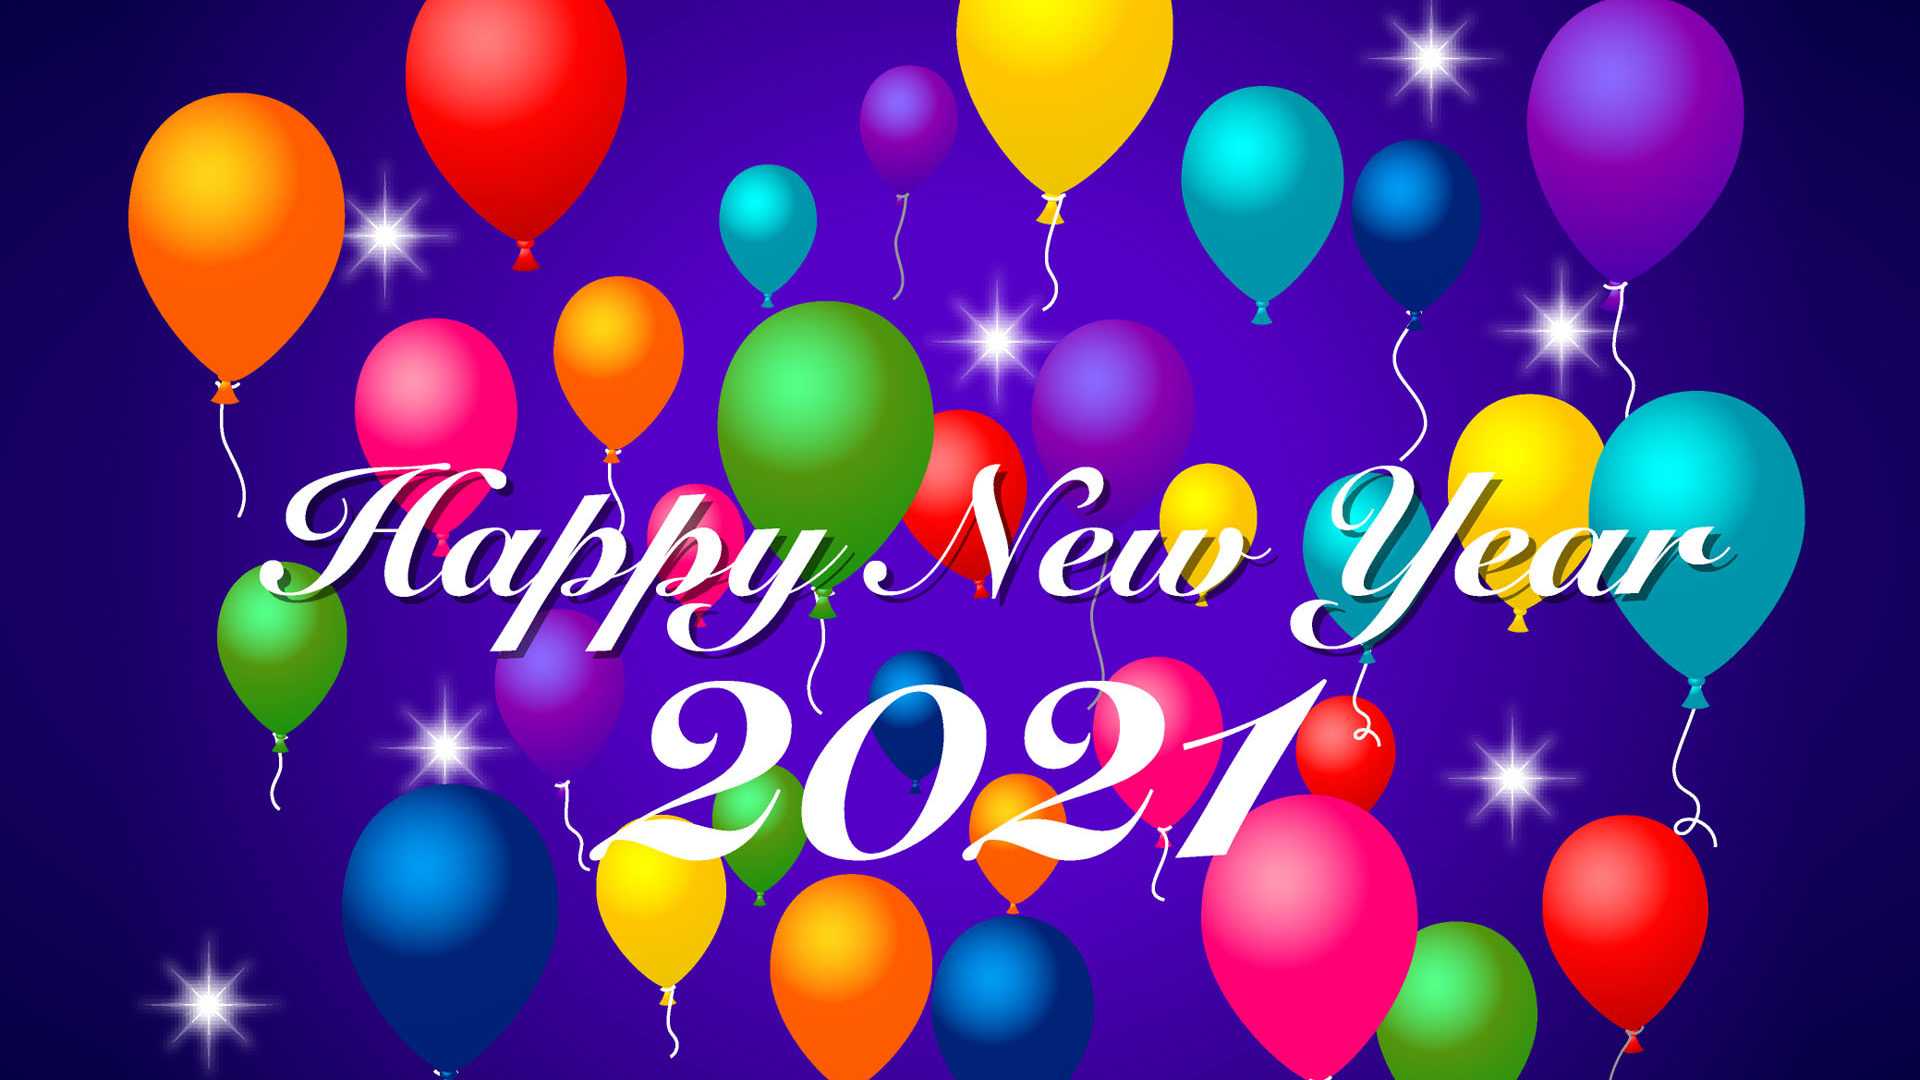 2021 New Year Wallpaper - KoLPaPer - Awesome Free HD Wallpapers